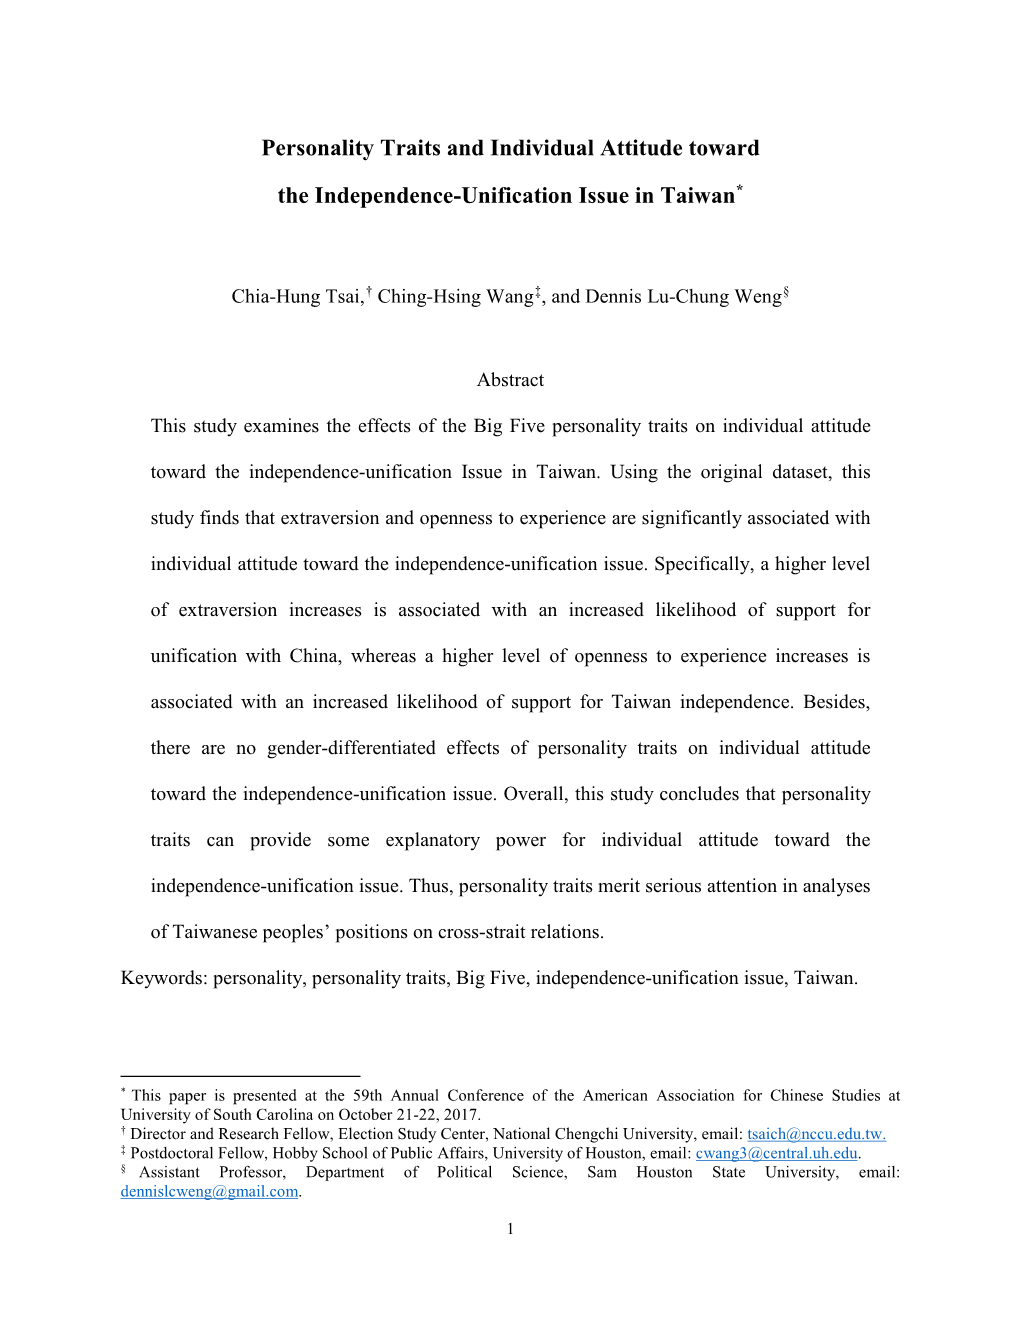 Personality Traits and Individual Attitude Toward the Independence-Unification Issue in Taiwan